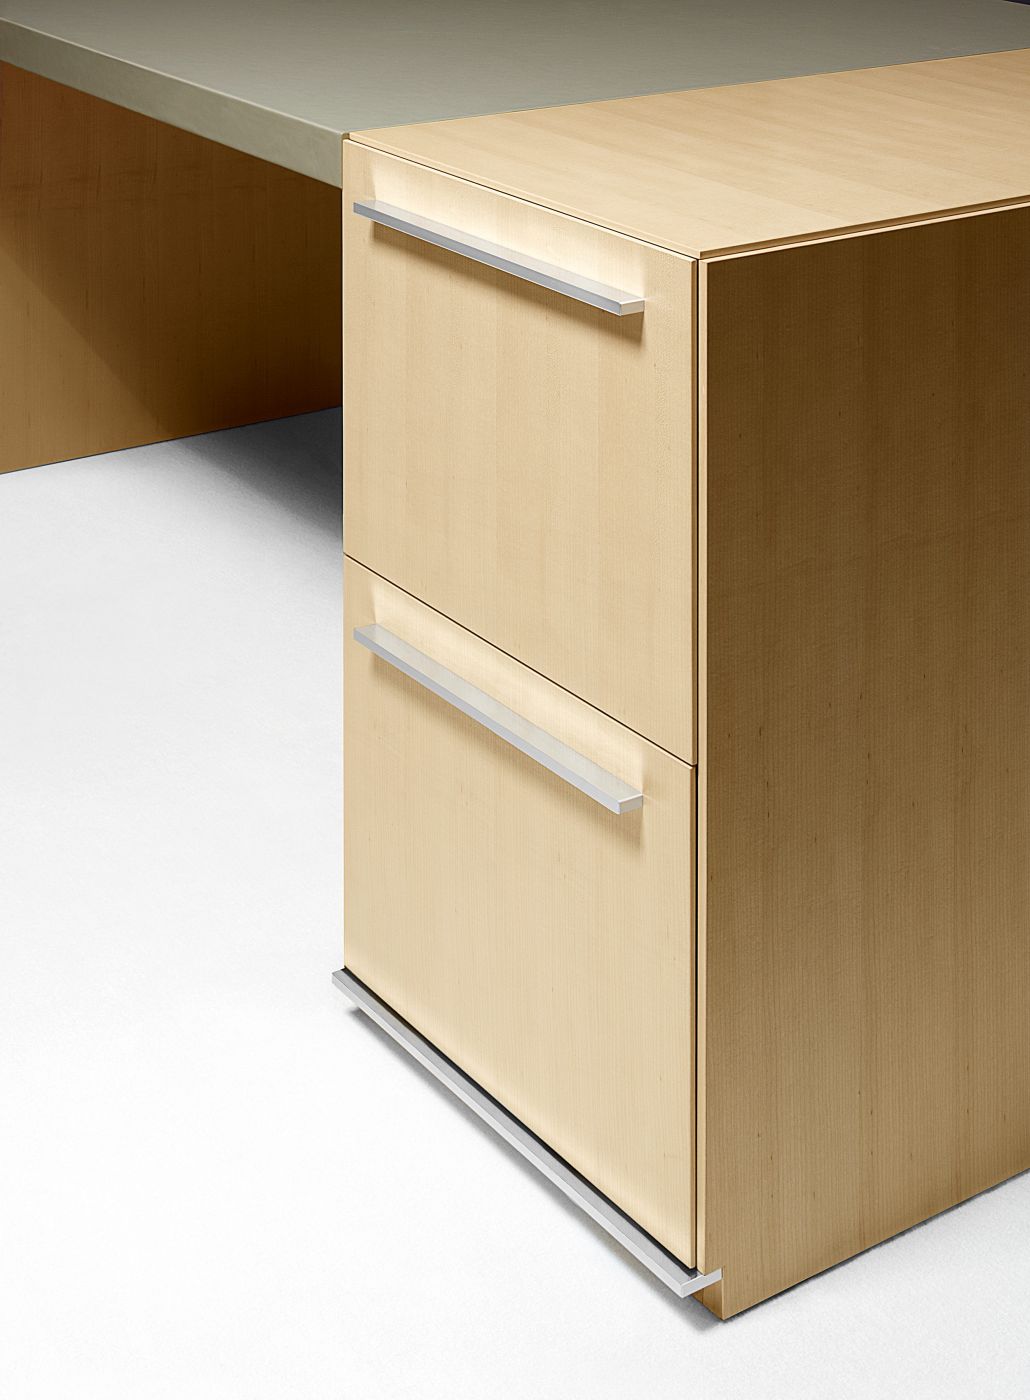 Pedestals and cabinets are available with an optional base accent to complement the Mitre finger pull in proportion and finish.